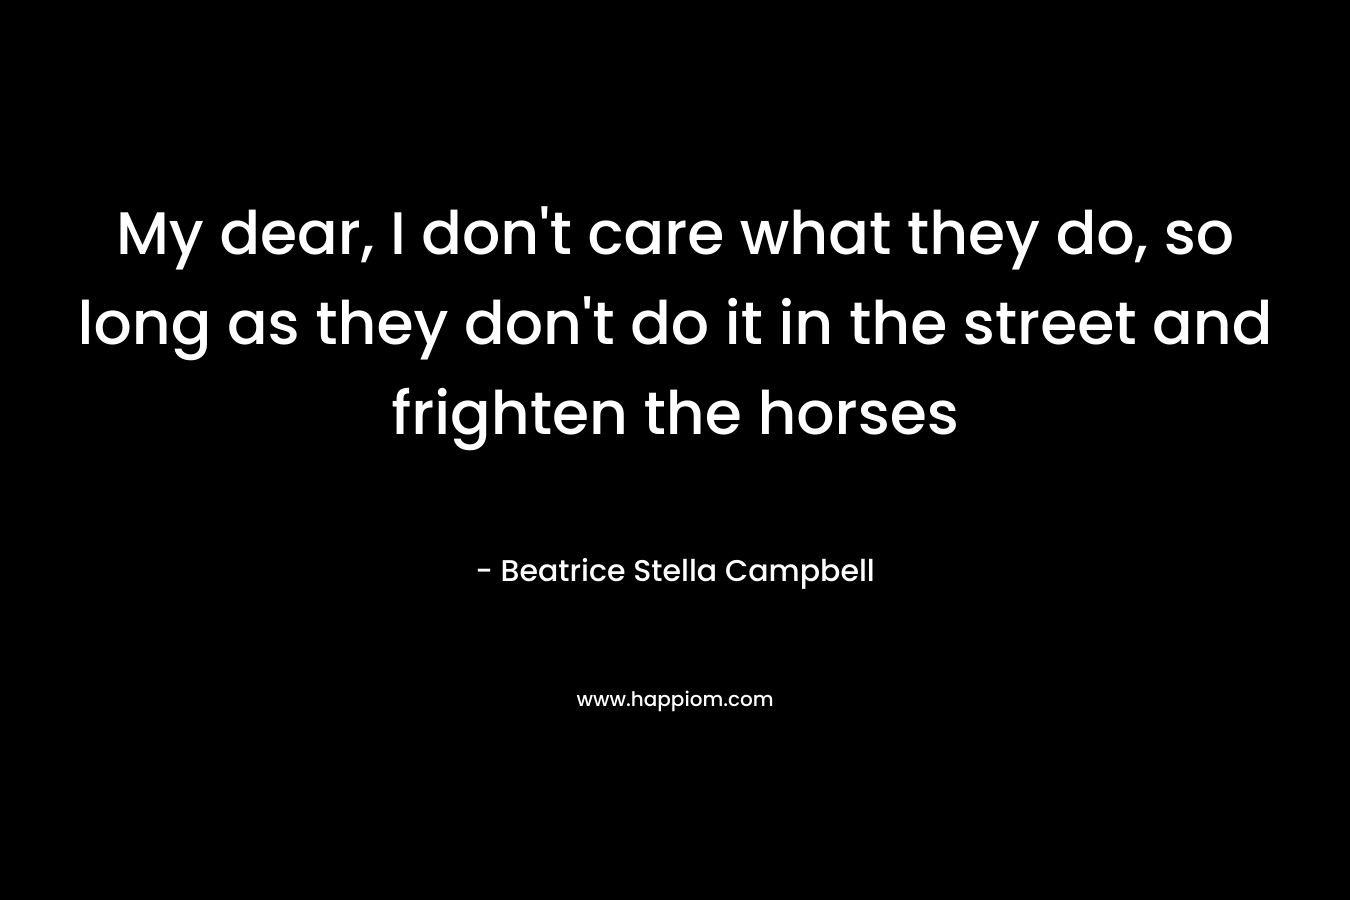 My dear, I don’t care what they do, so long as they don’t do it in the street and frighten the horses – Beatrice Stella Campbell